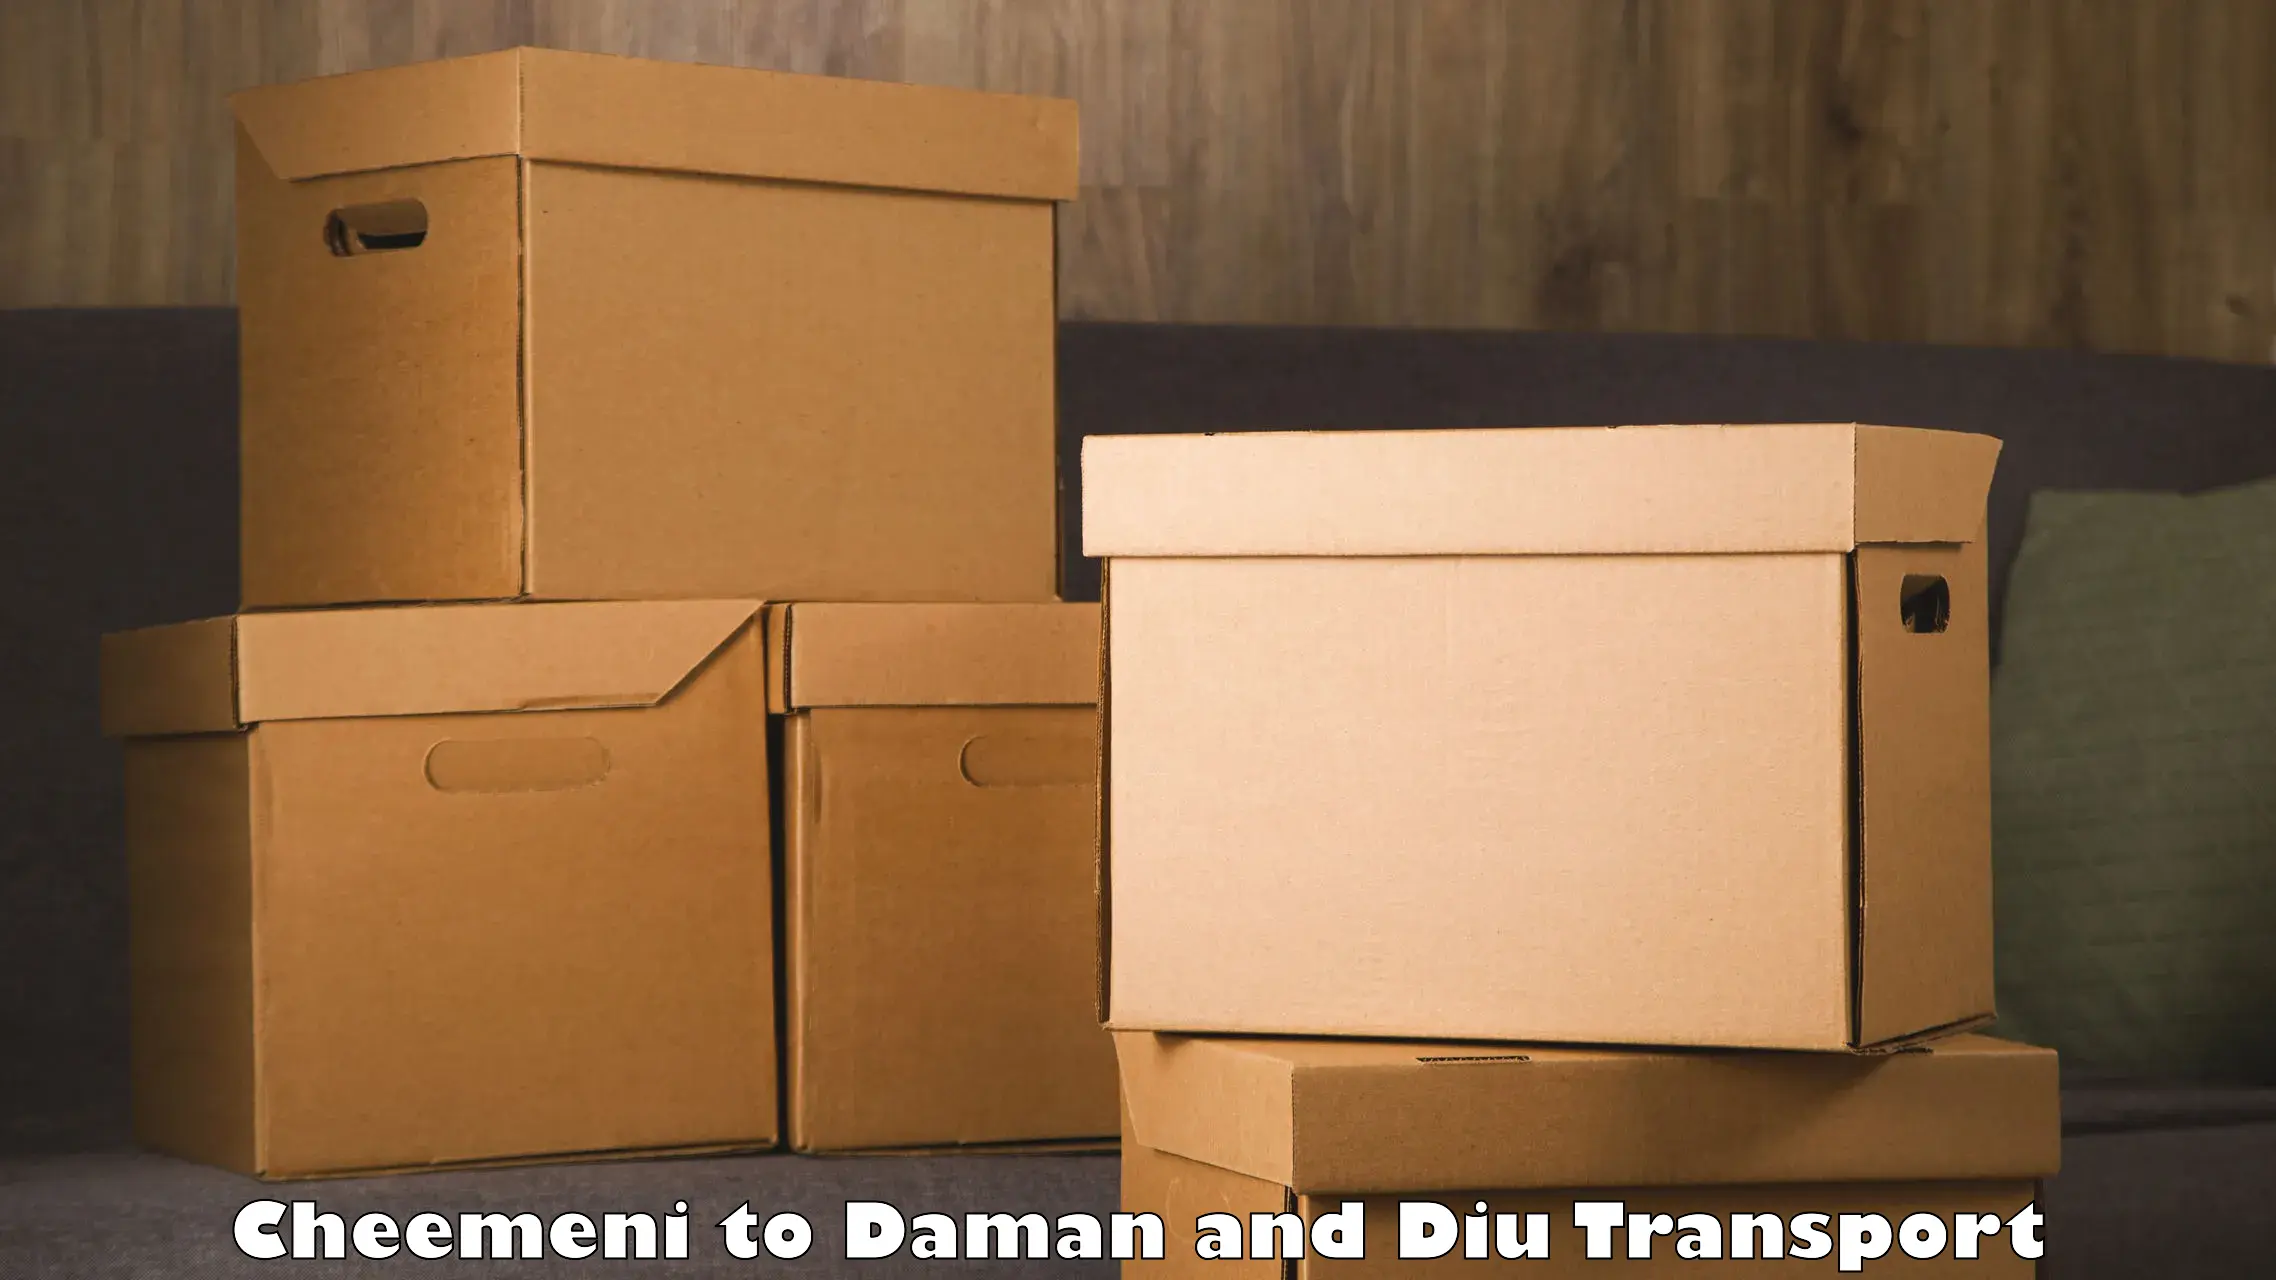 Express transport services in Cheemeni to Daman and Diu